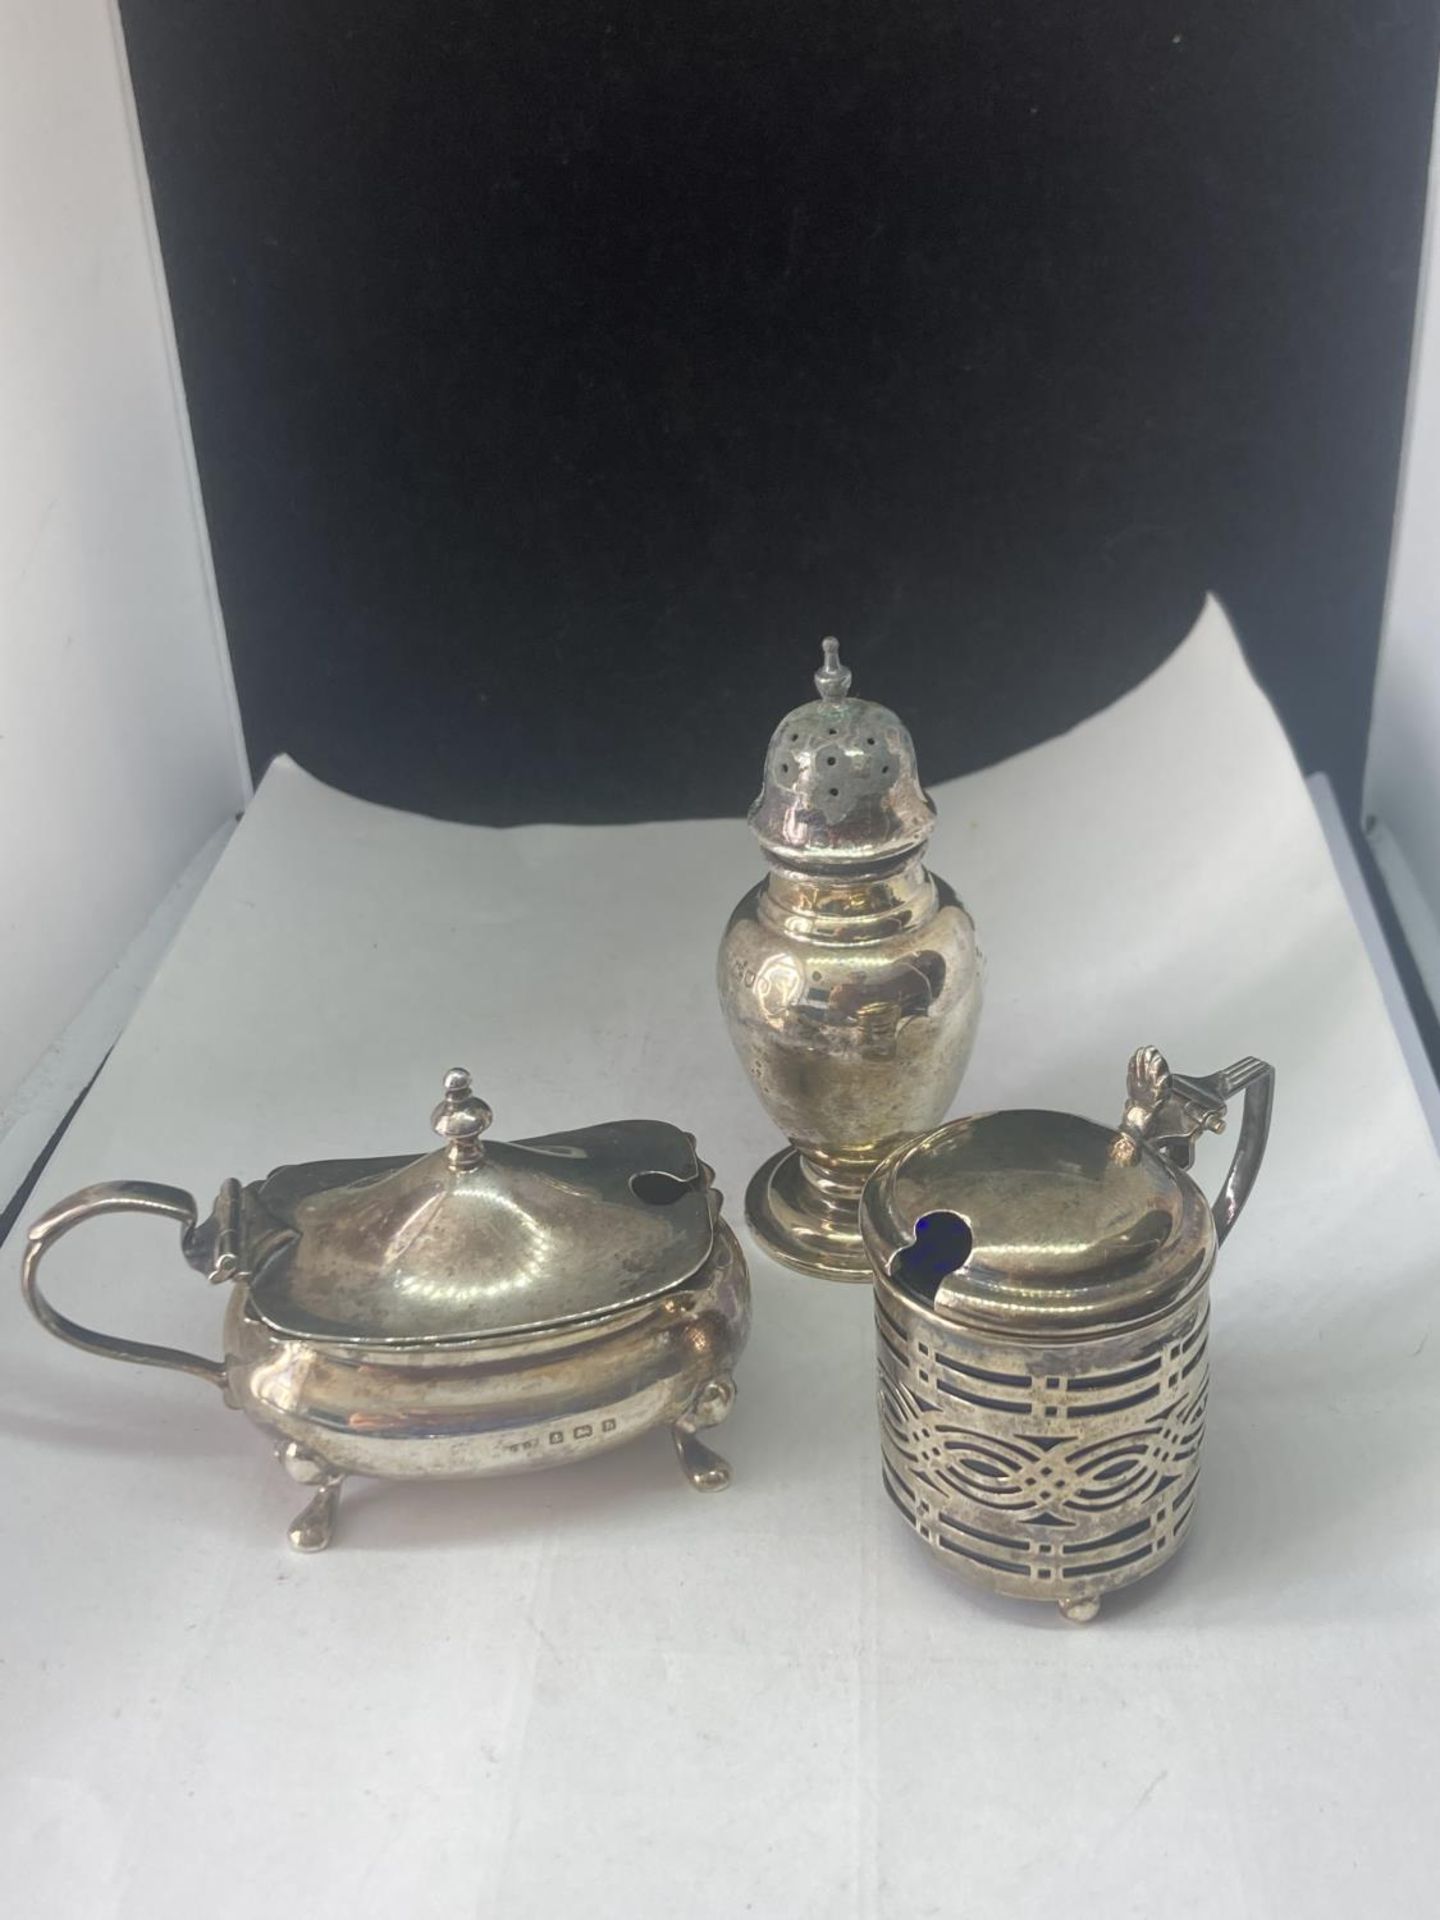 TWO HALLMARKED SILVER POTS (ONE WITH BLUE GLASS LINER) AND A HALLMARKED LONDON PEPPER POT GROSS - Image 2 of 8